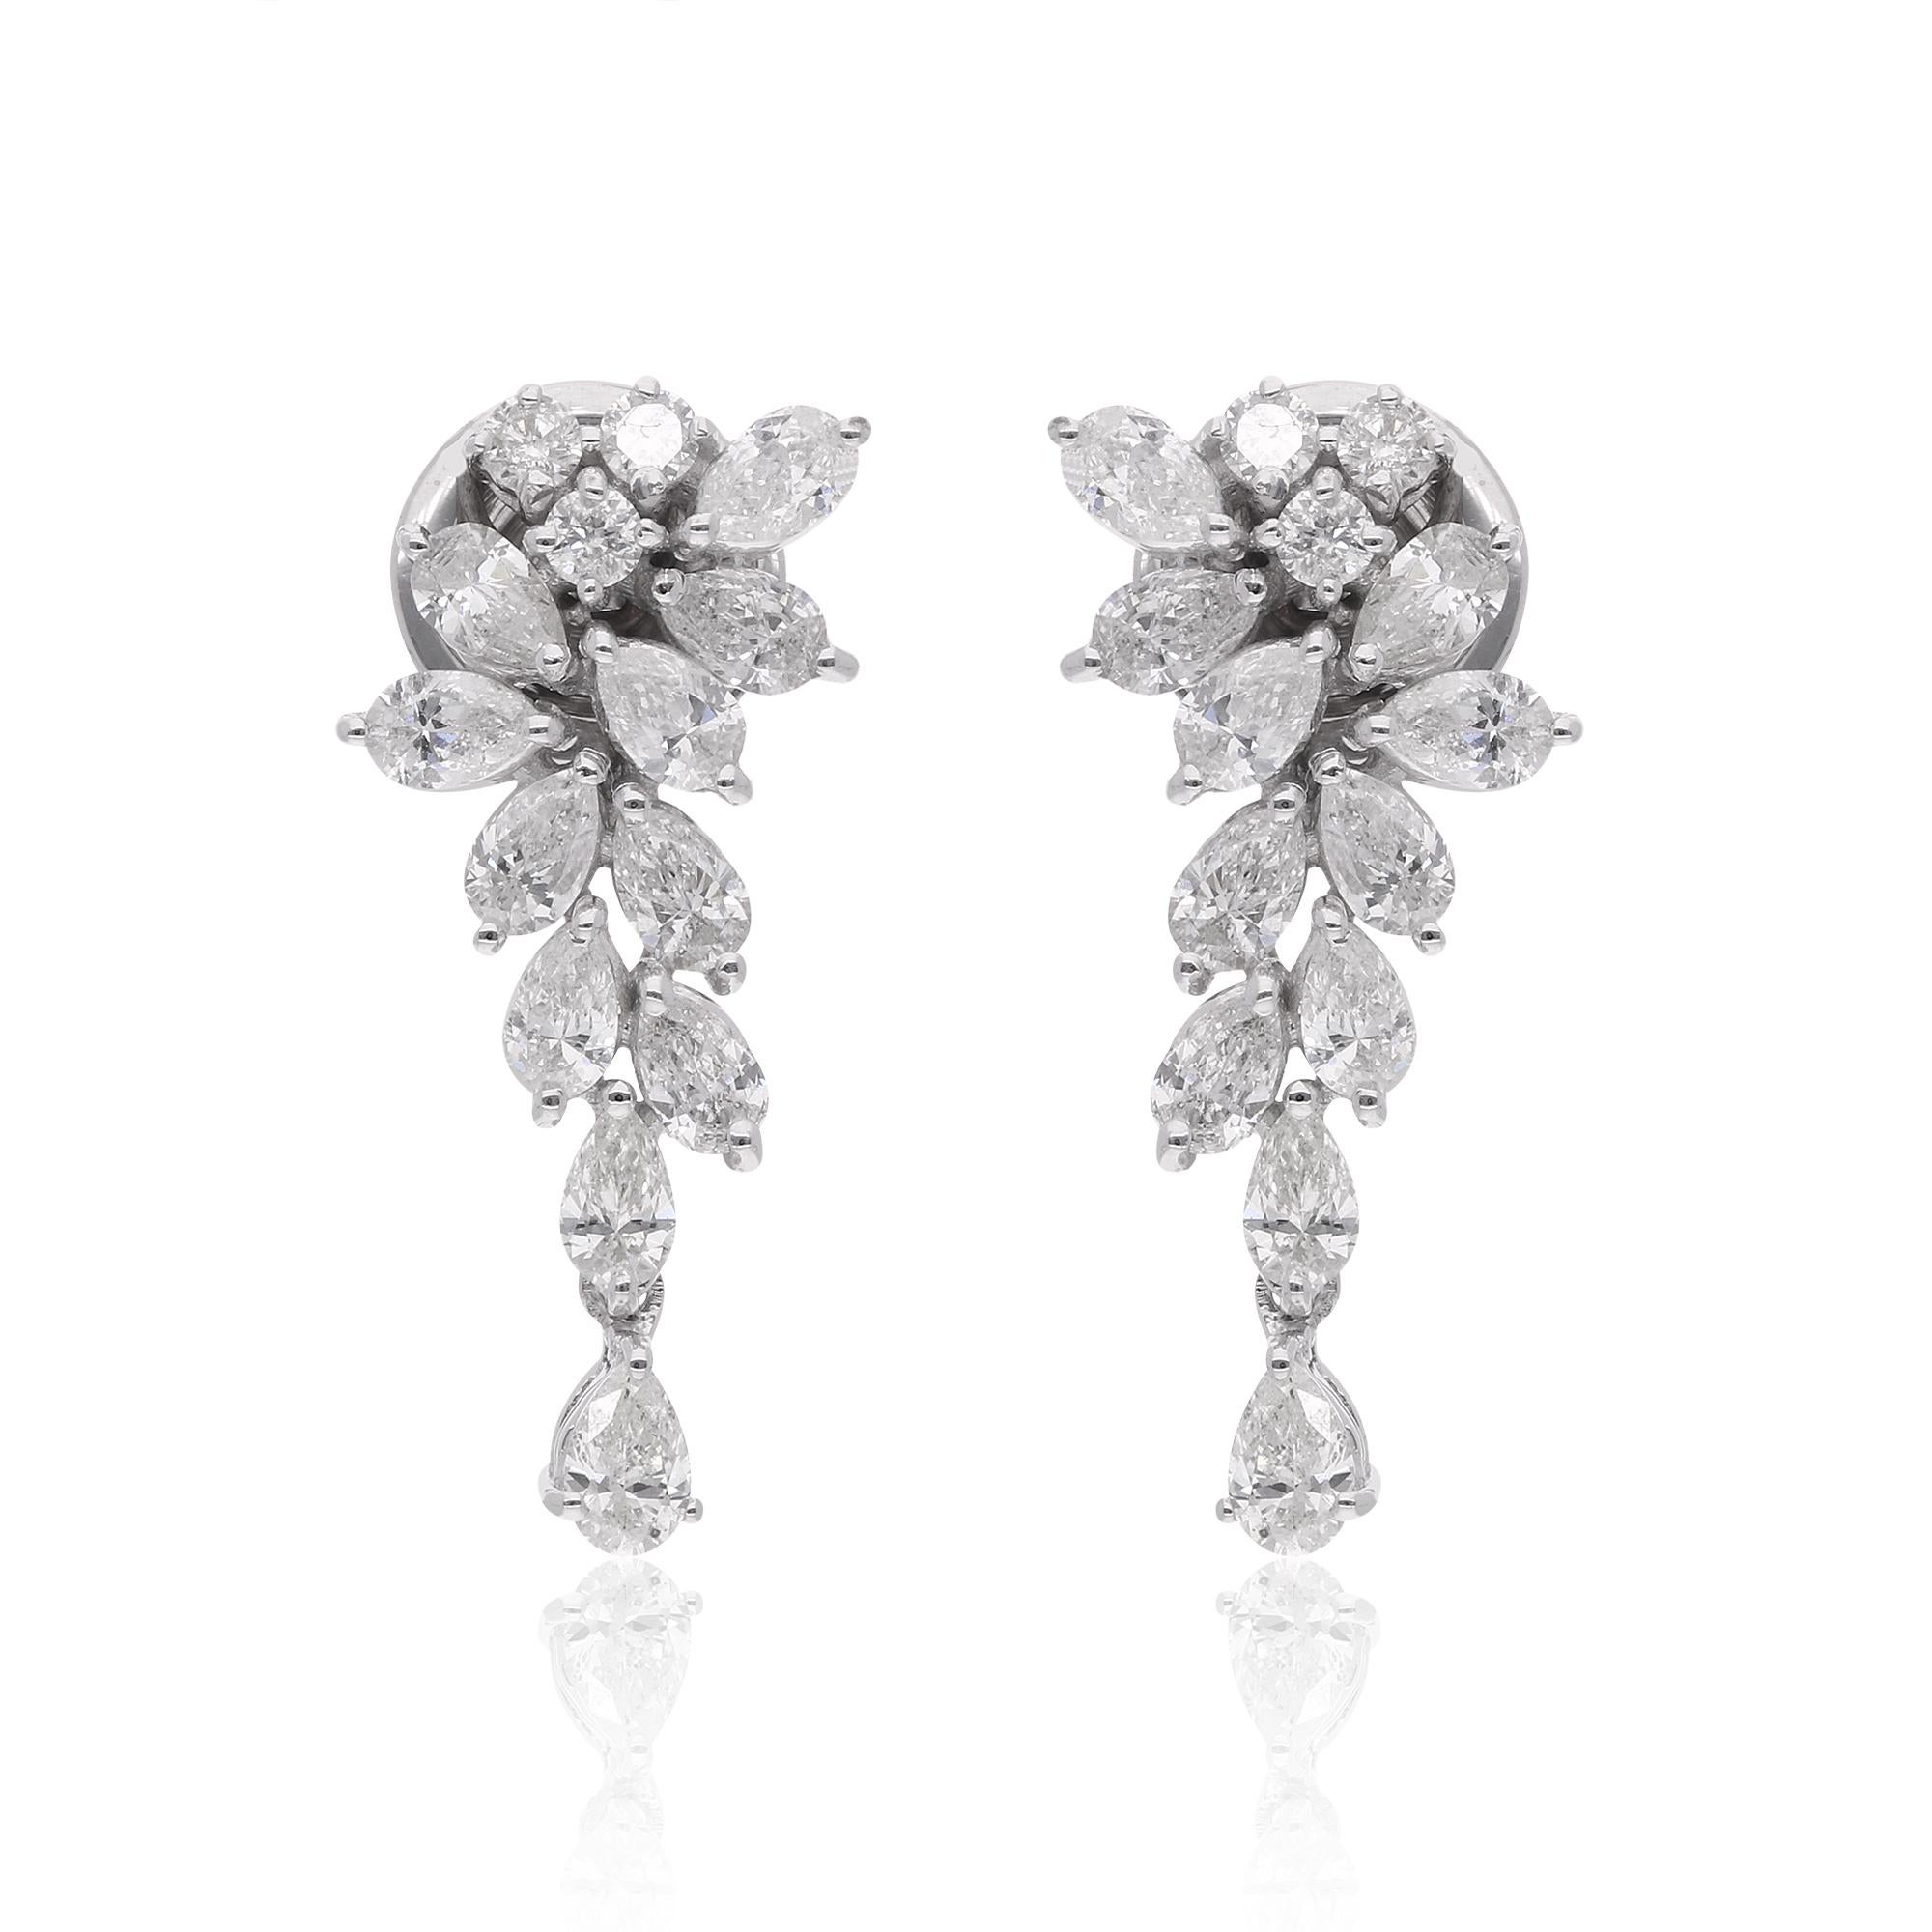 These dangle earrings are meticulously crafted, with each diamond precisely set to showcase its beauty. The design allows the earrings to gracefully sway with your every movement, capturing attention and adding a touch of glamour to any ensemble.